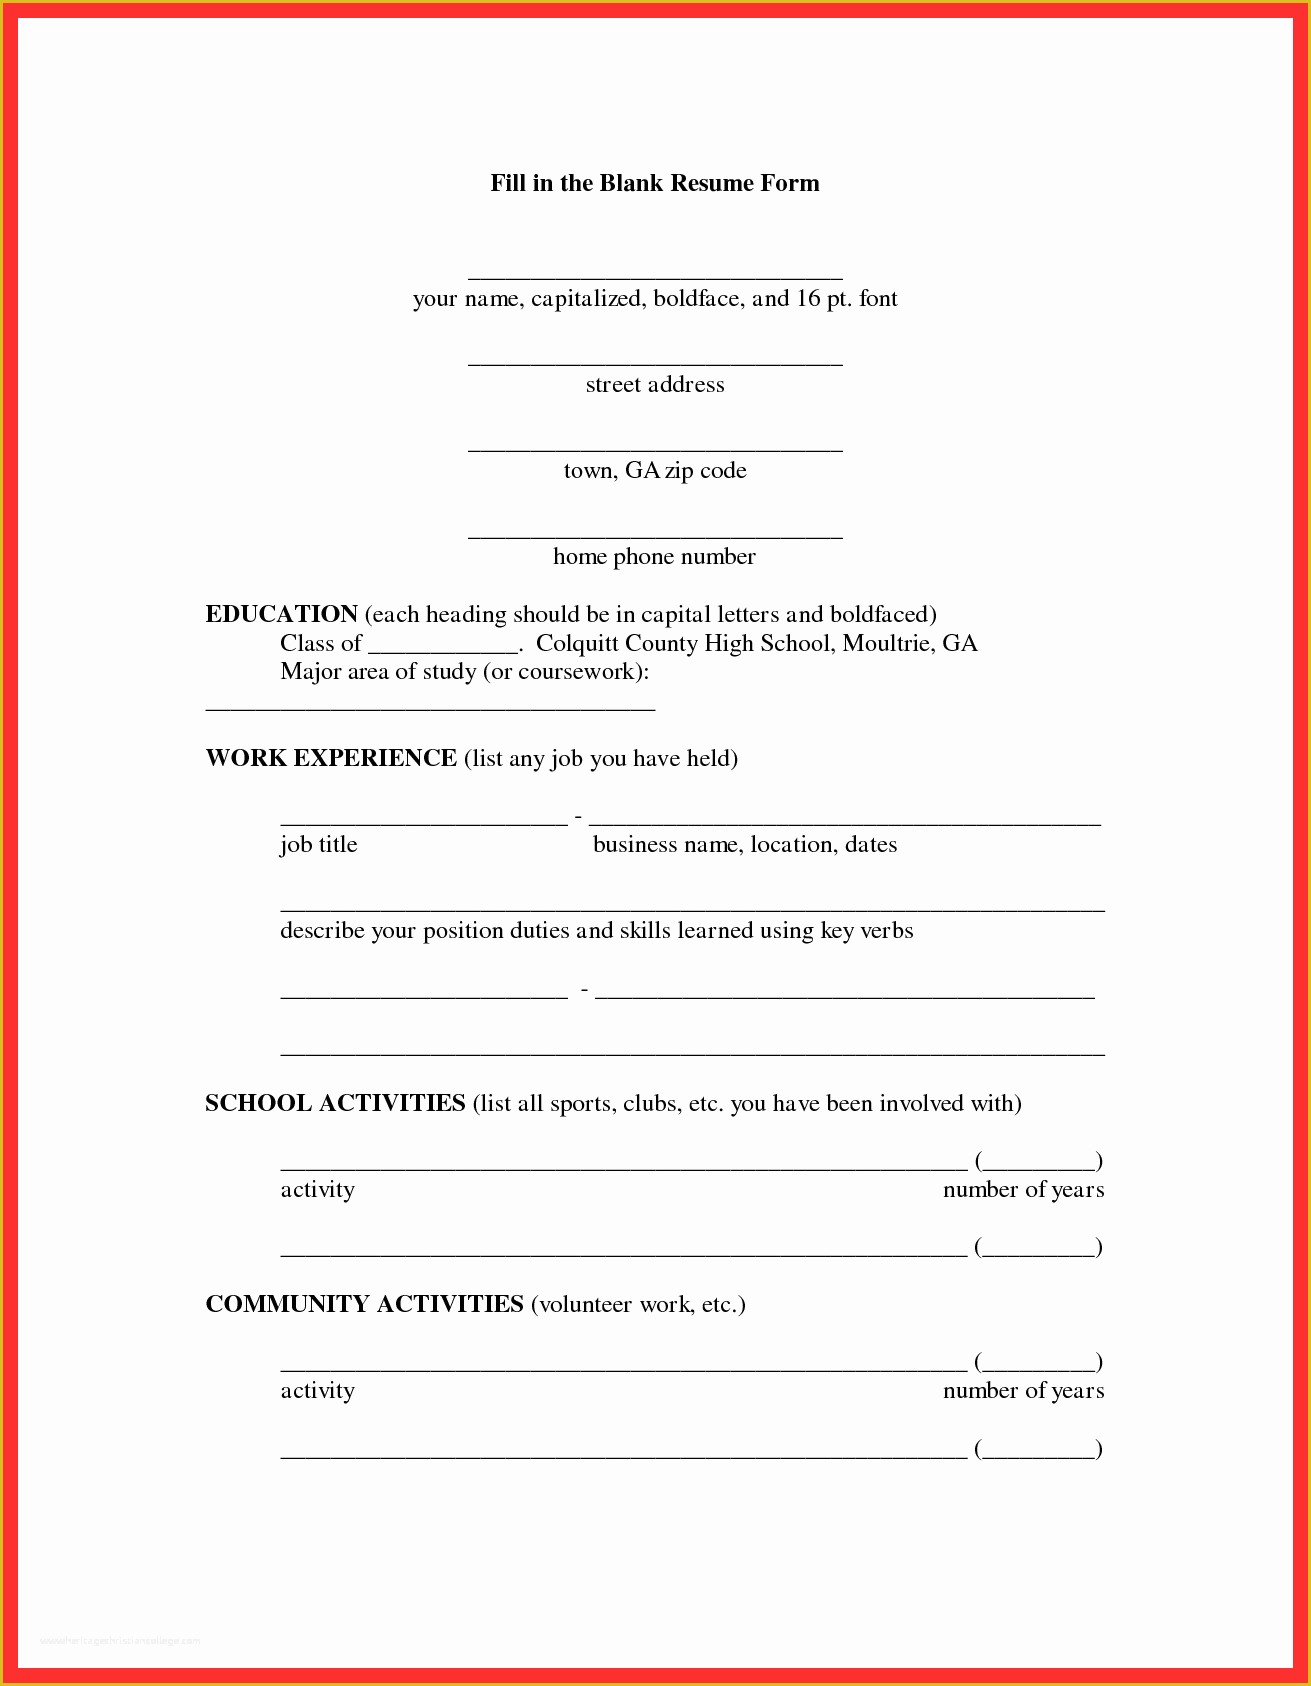 Free Online Resume Templates Printable Of Fill In Resume form